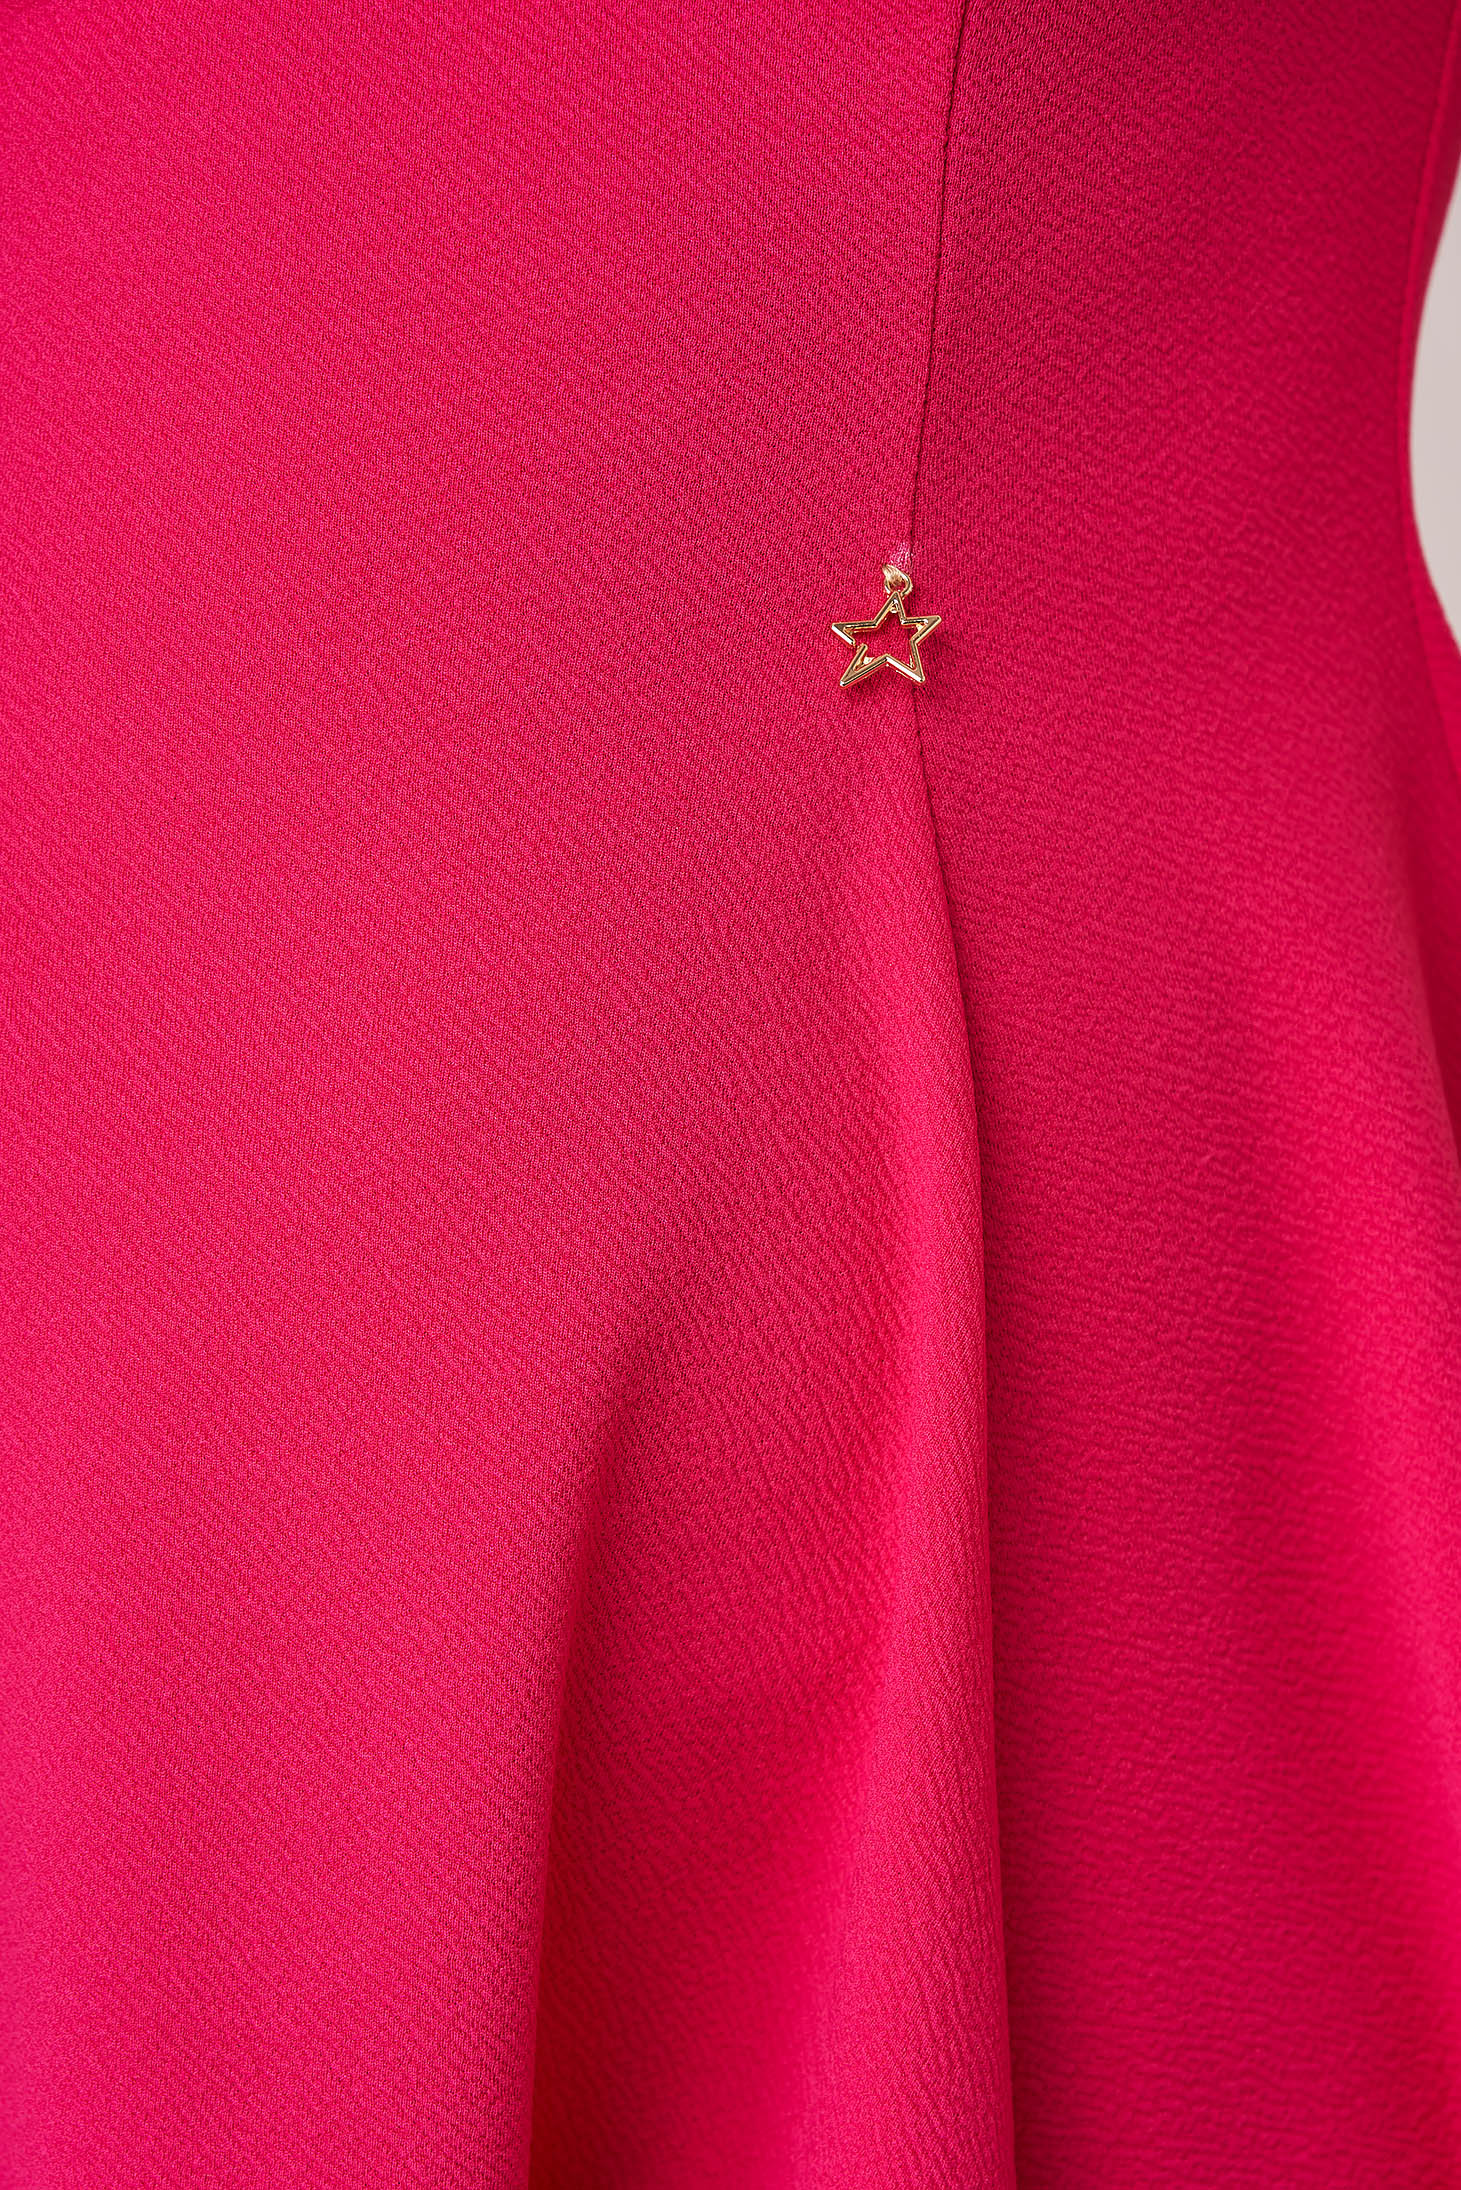 Fuchsia dress crepe short cut cloche with rounded cleavage - StarShinerS 4 - StarShinerS.com